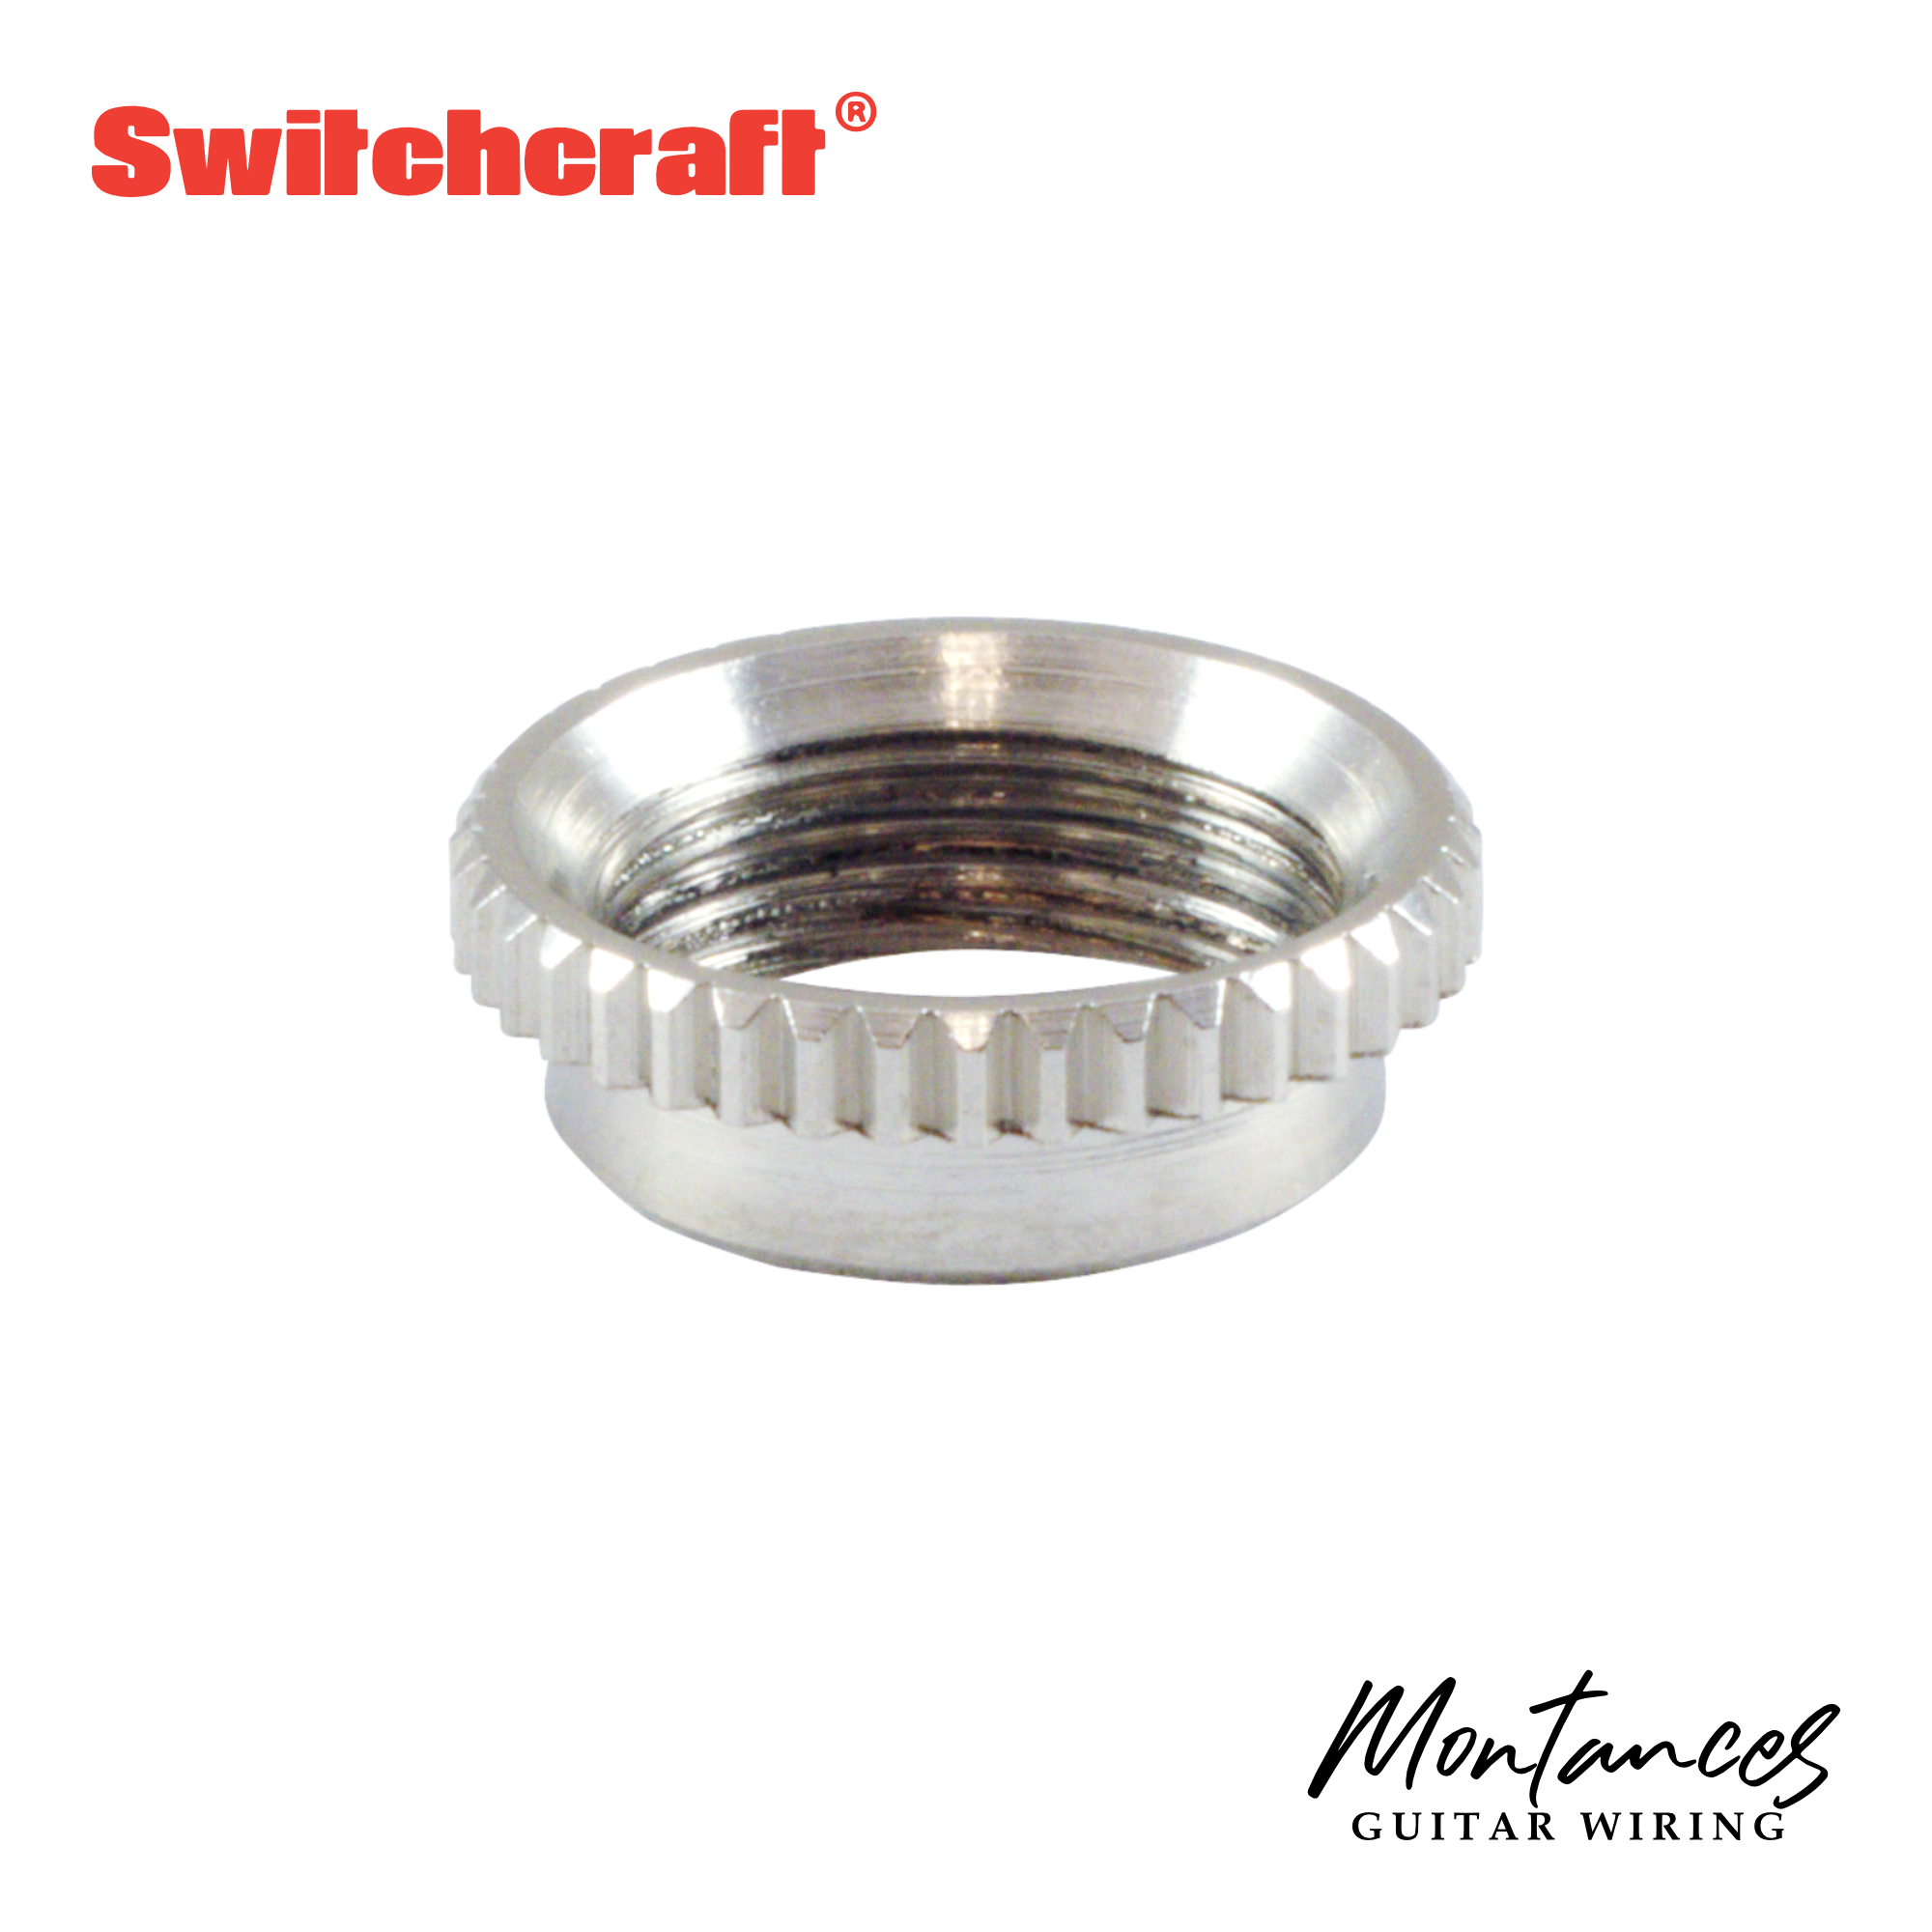 Switchcraft® Round Deep Nut for Toggle Switches